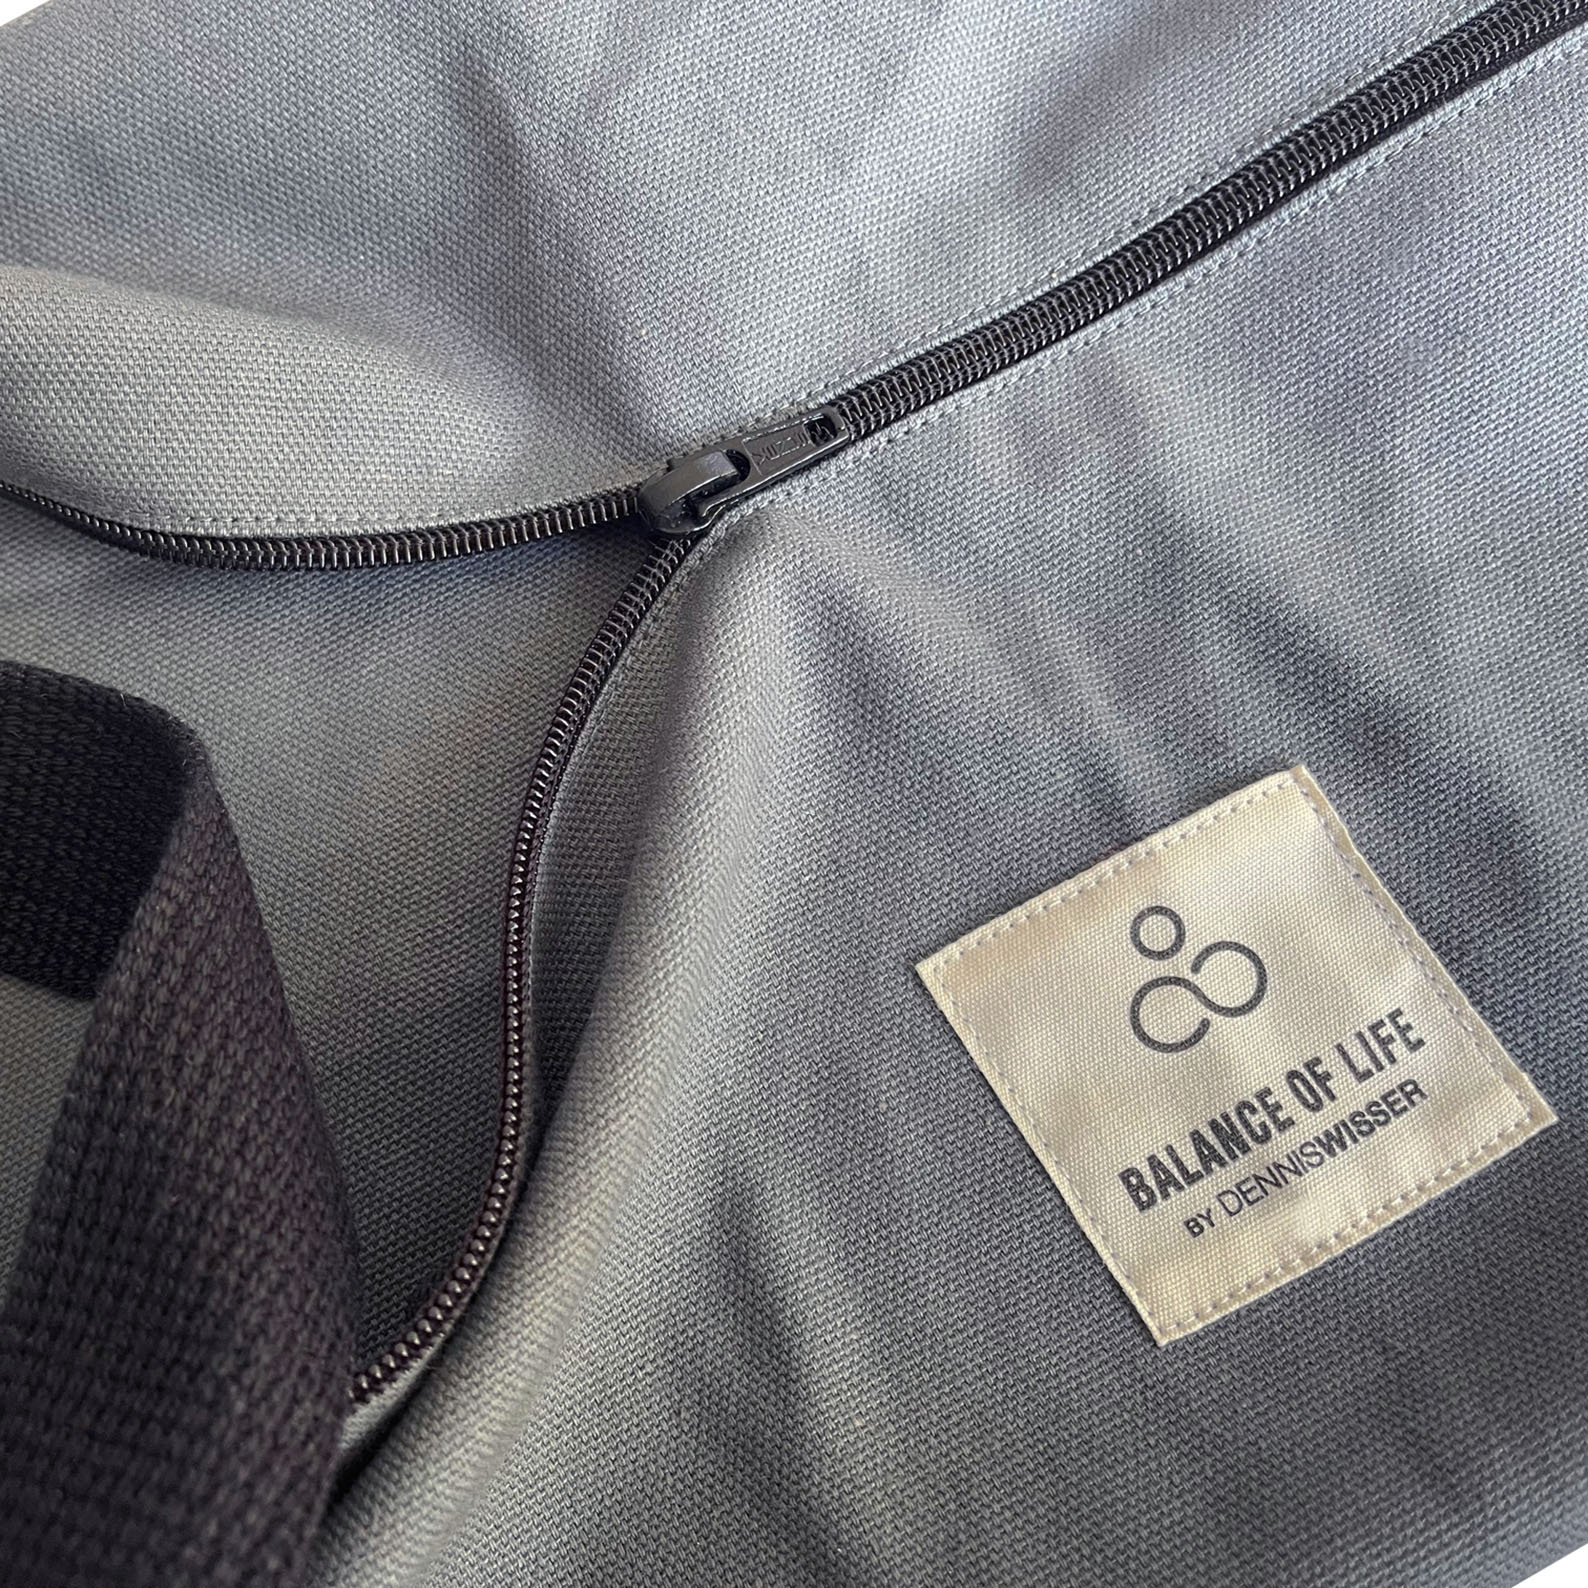 woven label on grey bag